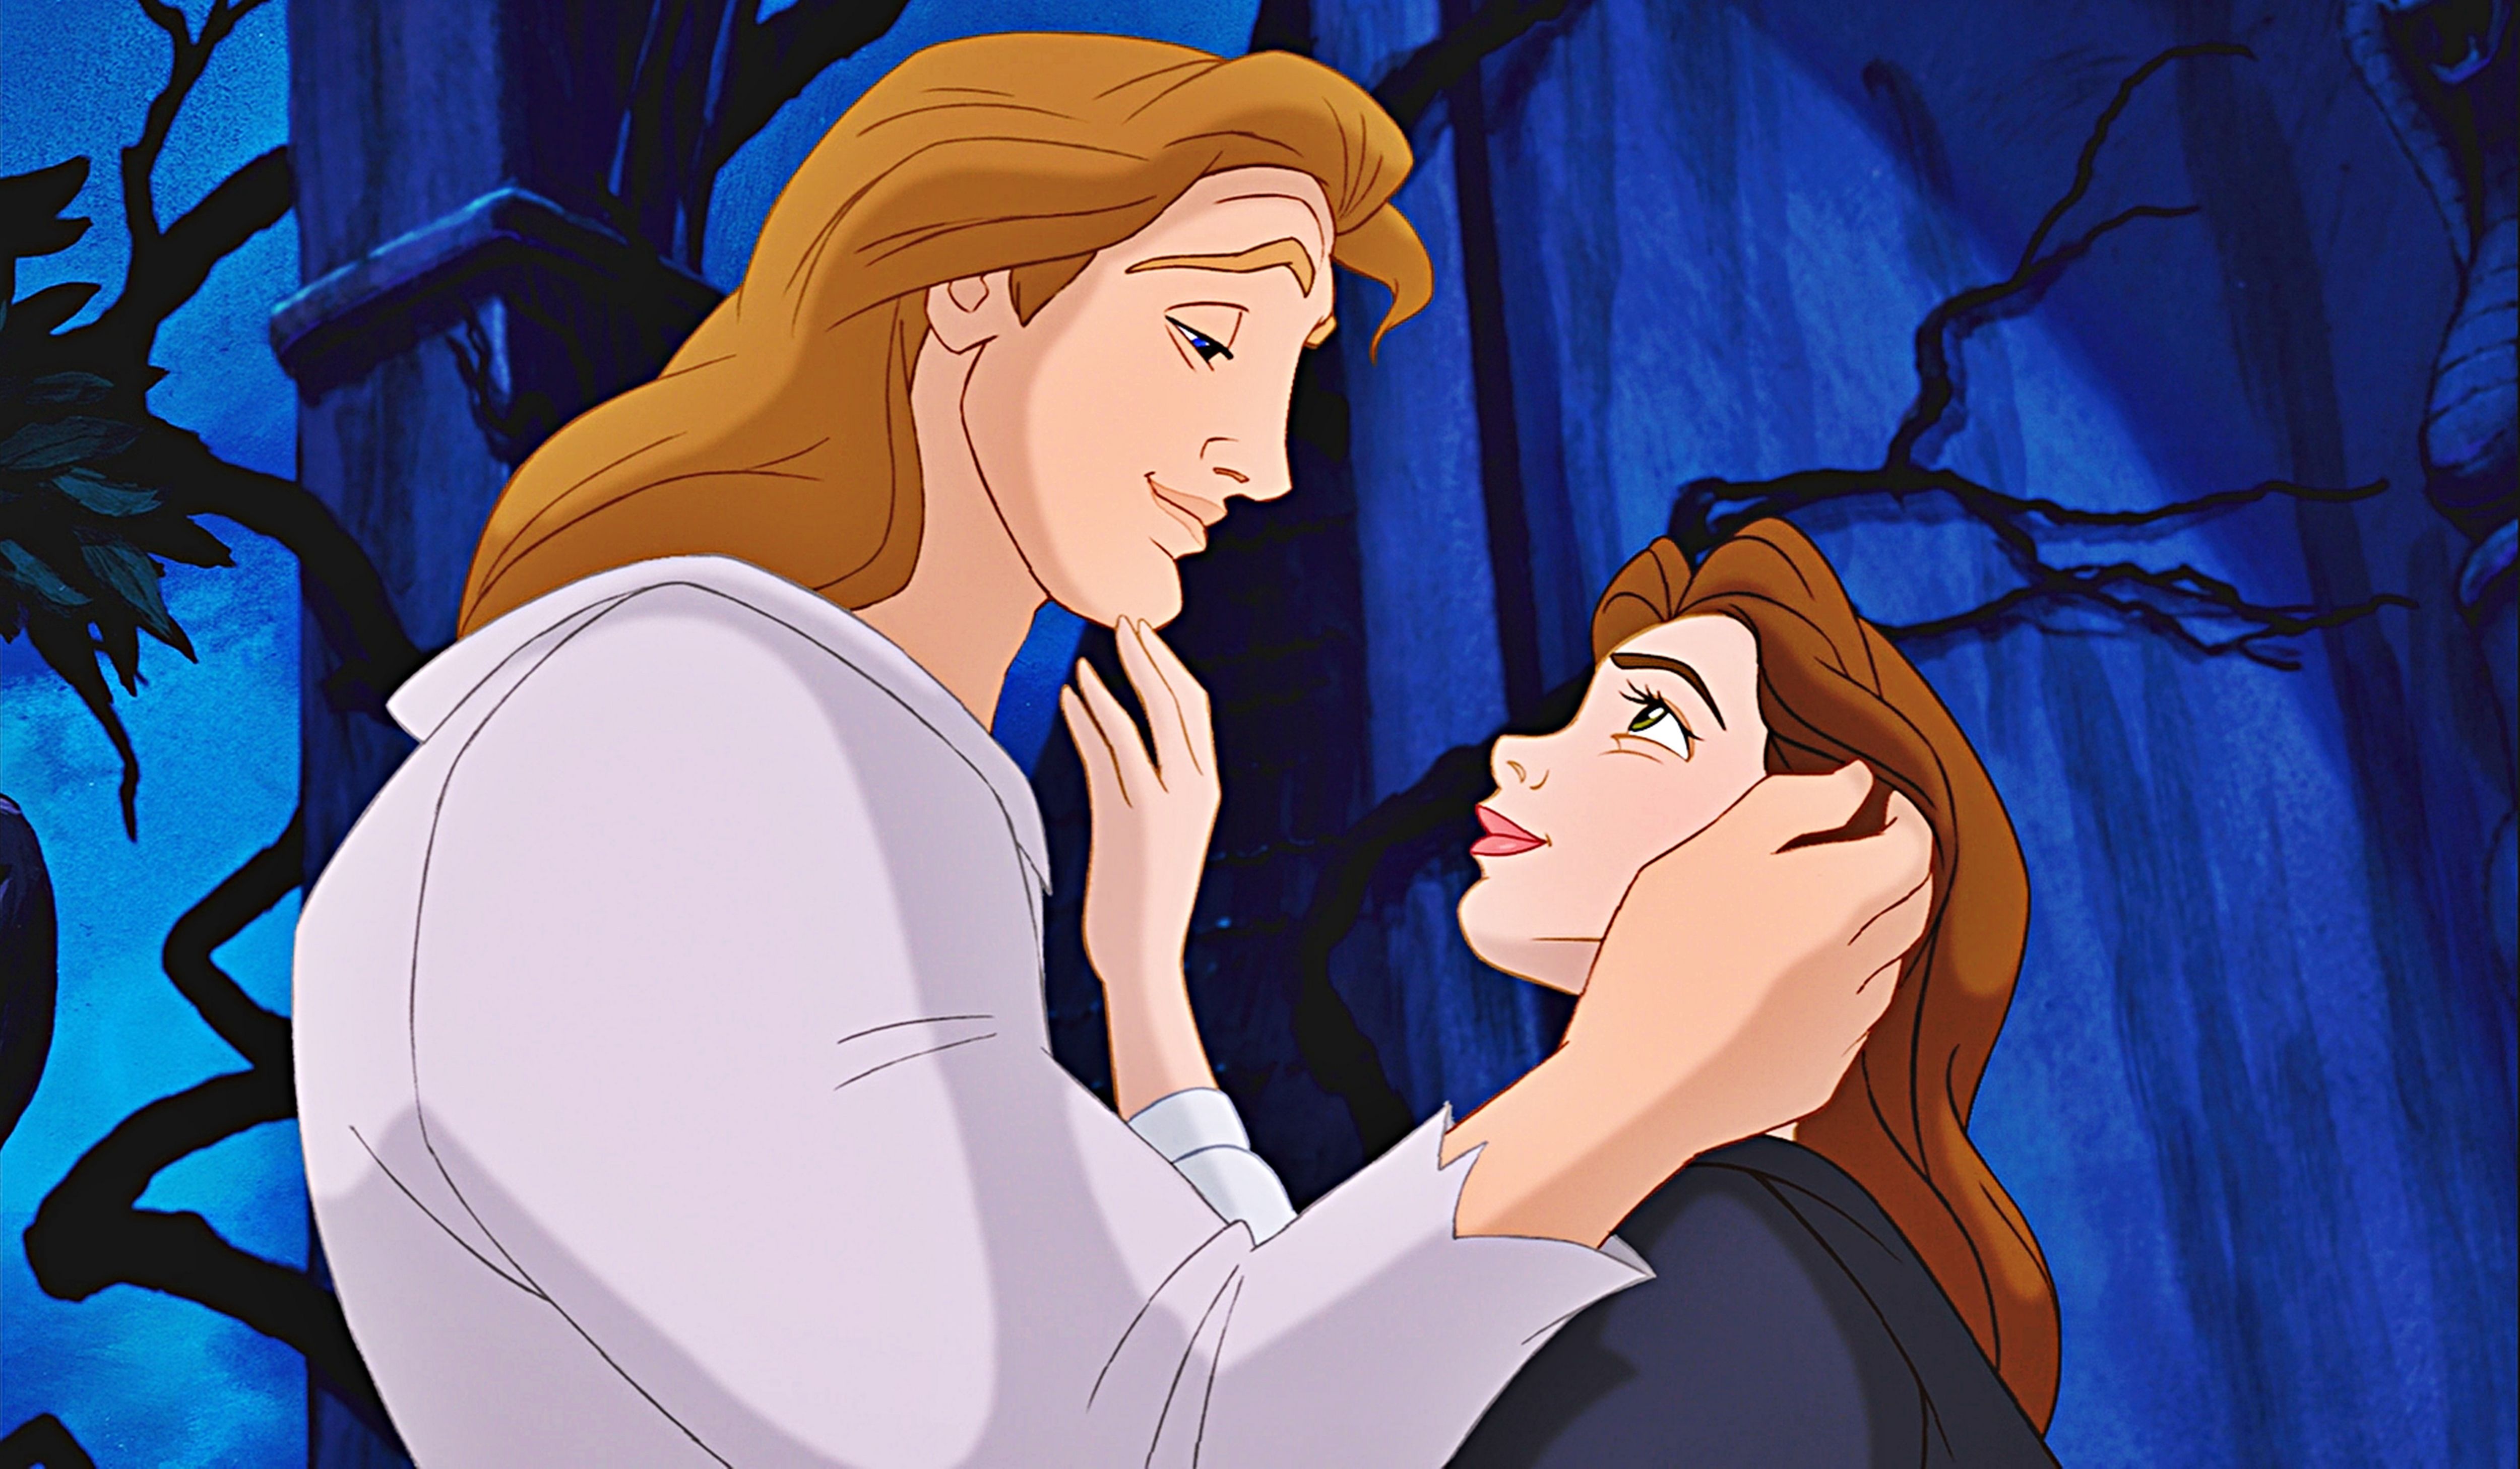 Beauty And The Beast Animated Prince Wallpaper